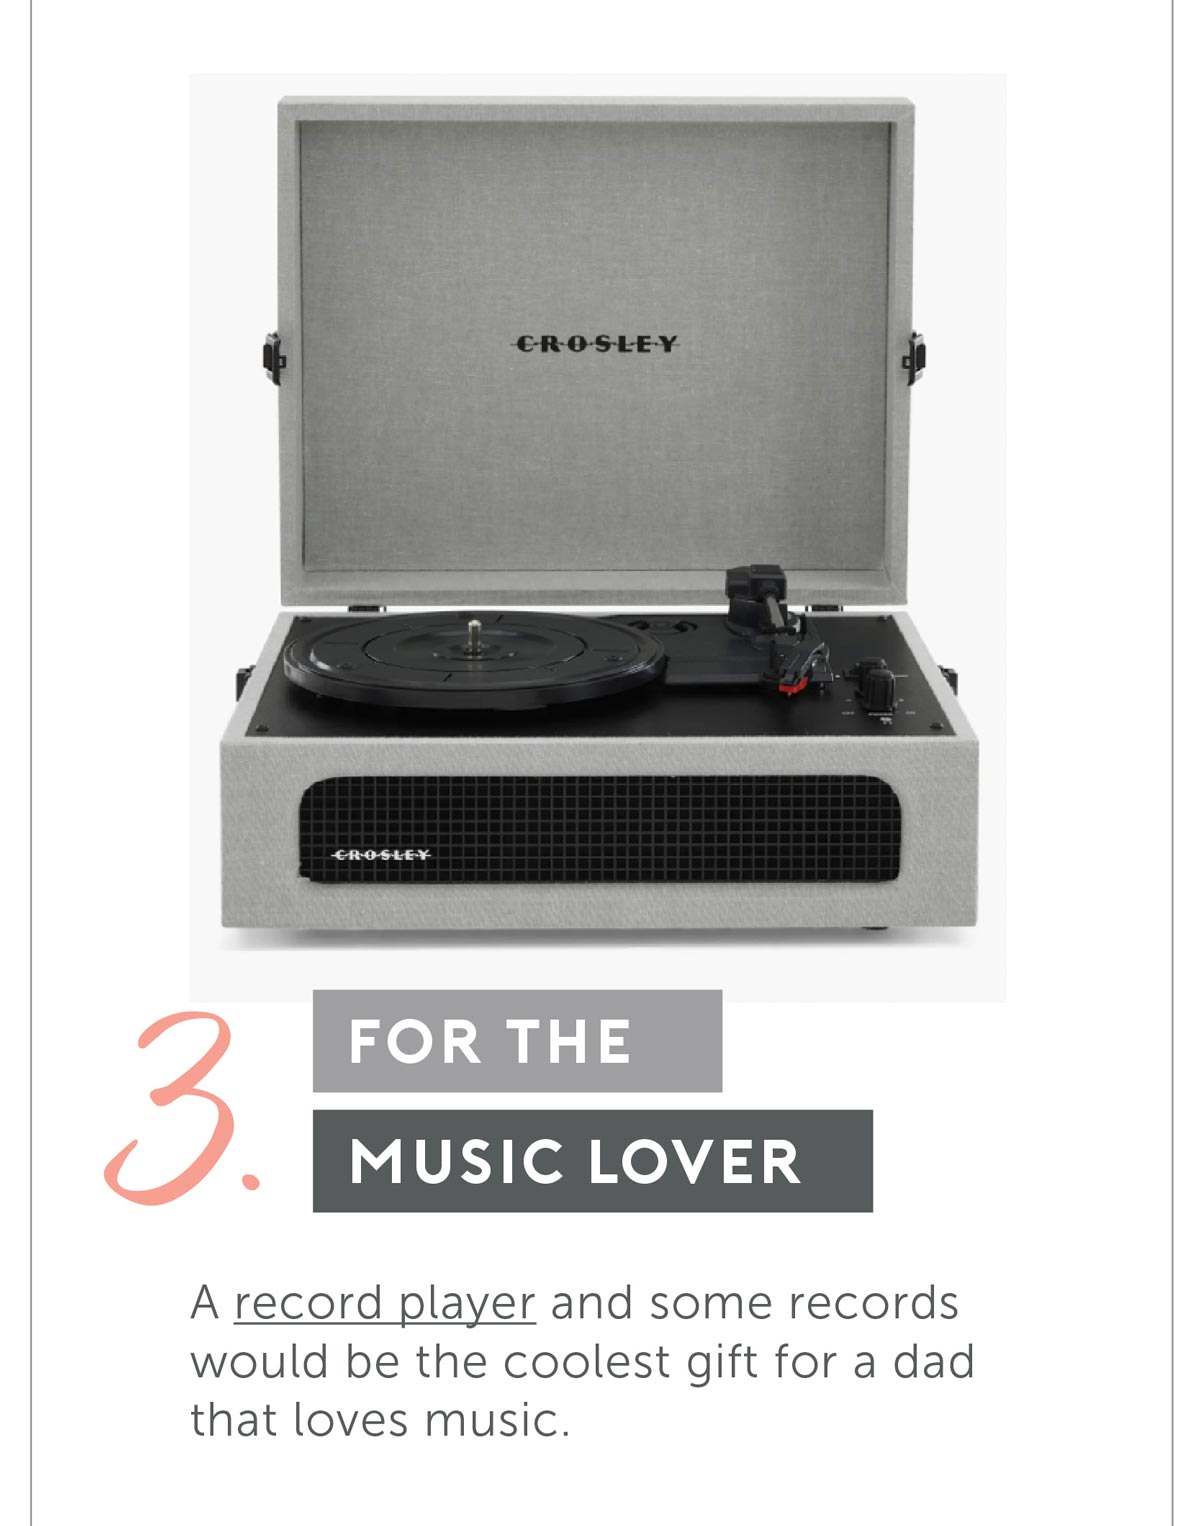 For the Music Lover. A record player and some records would be the coolest gift for a dad that loves music.